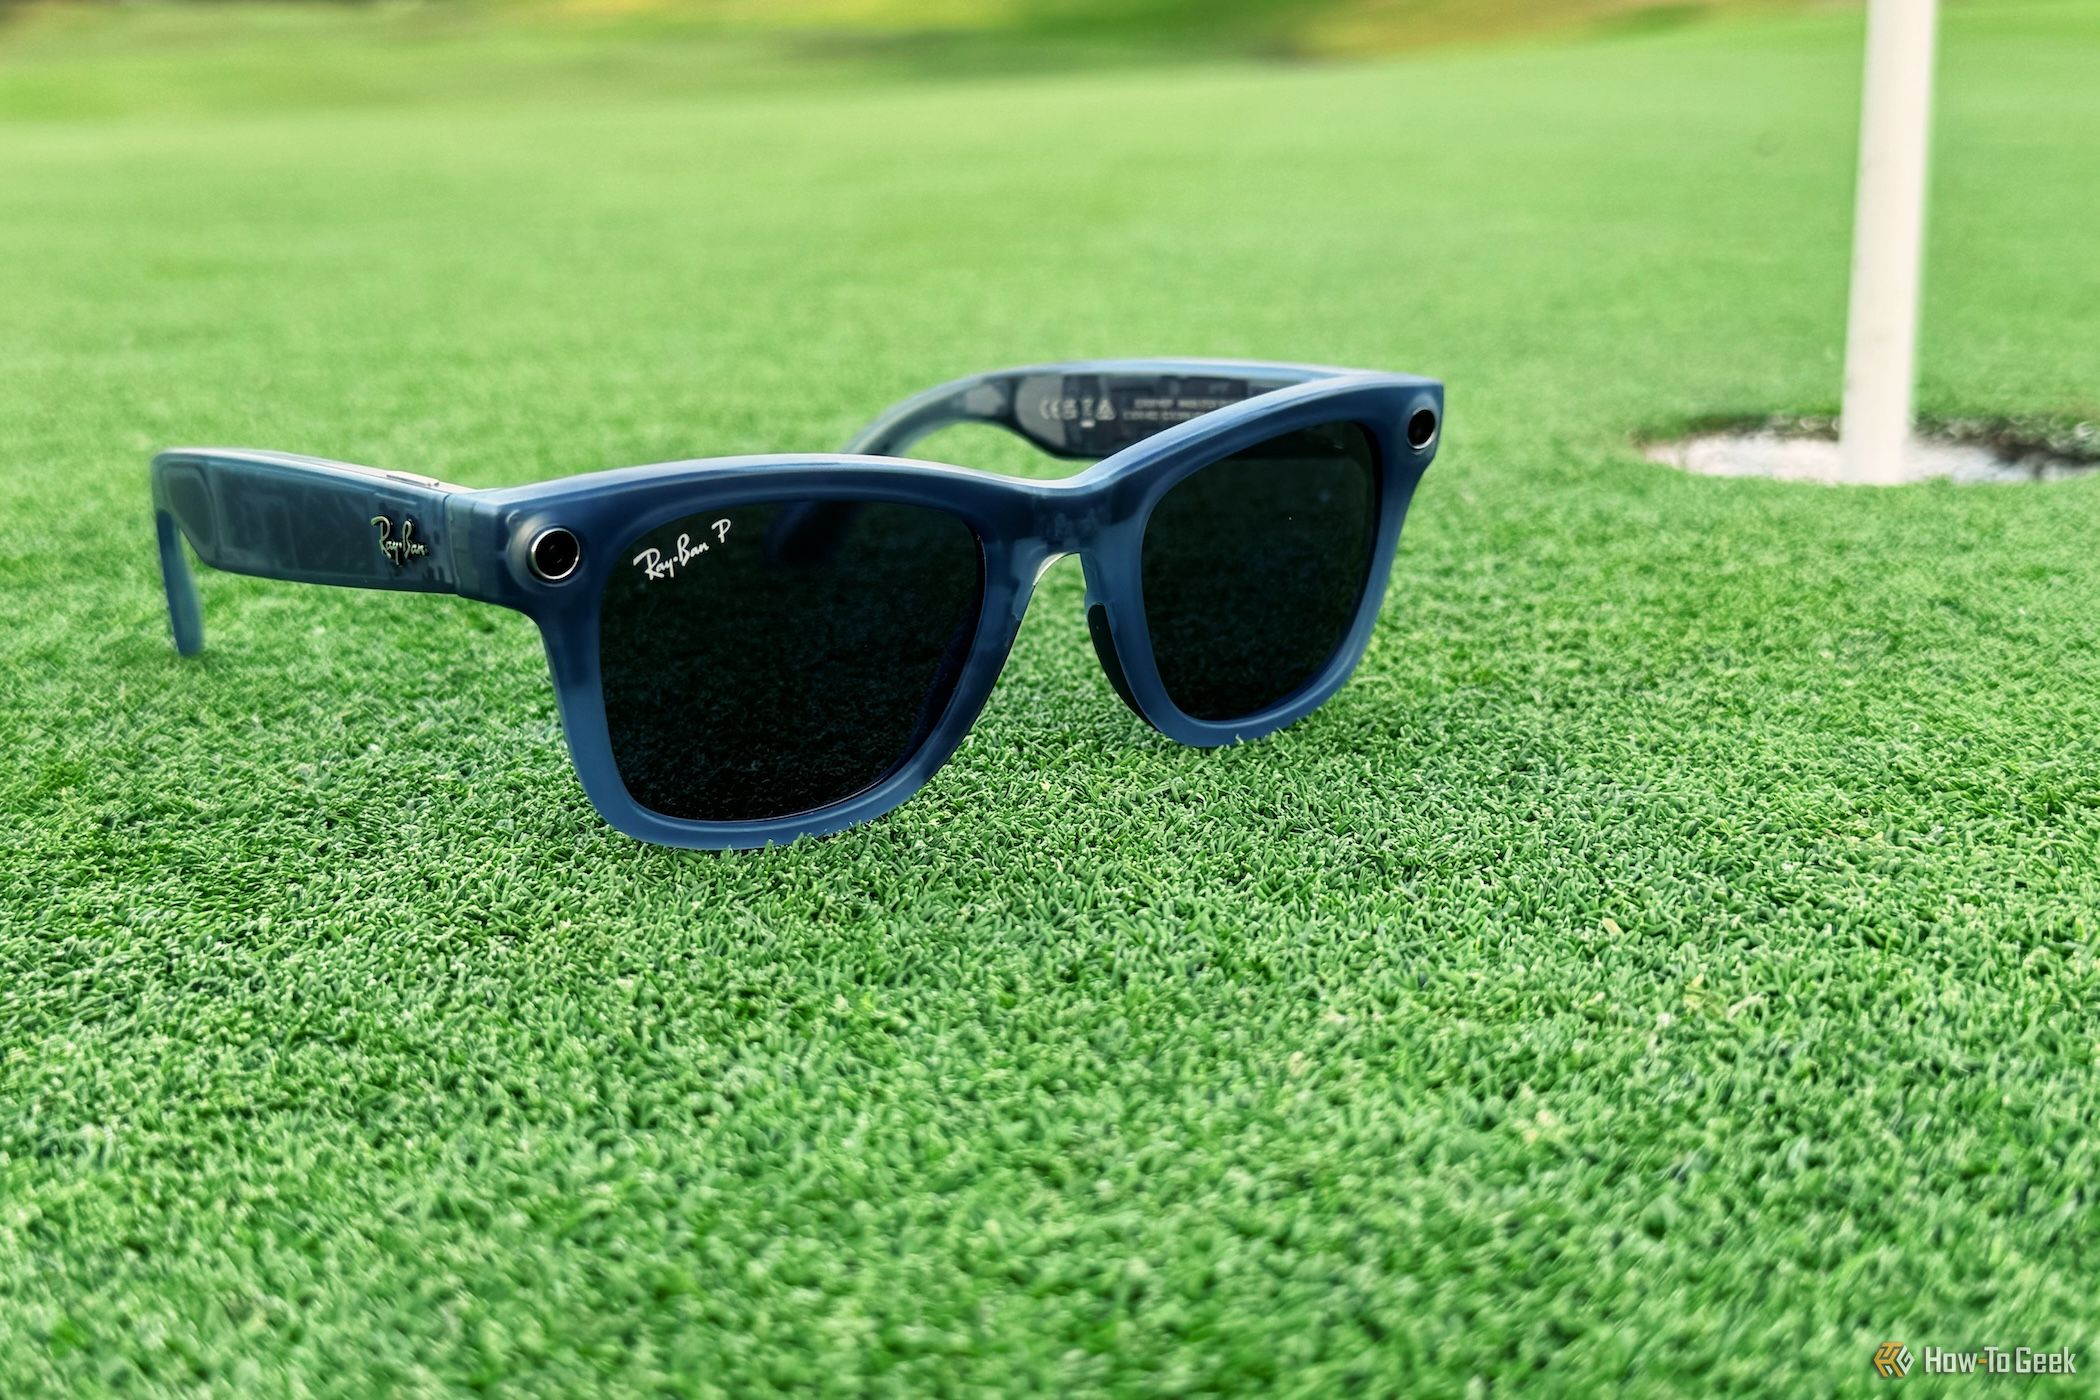 Ray-Ban Meta Smart Glasses unfolded on grass next to golf hole